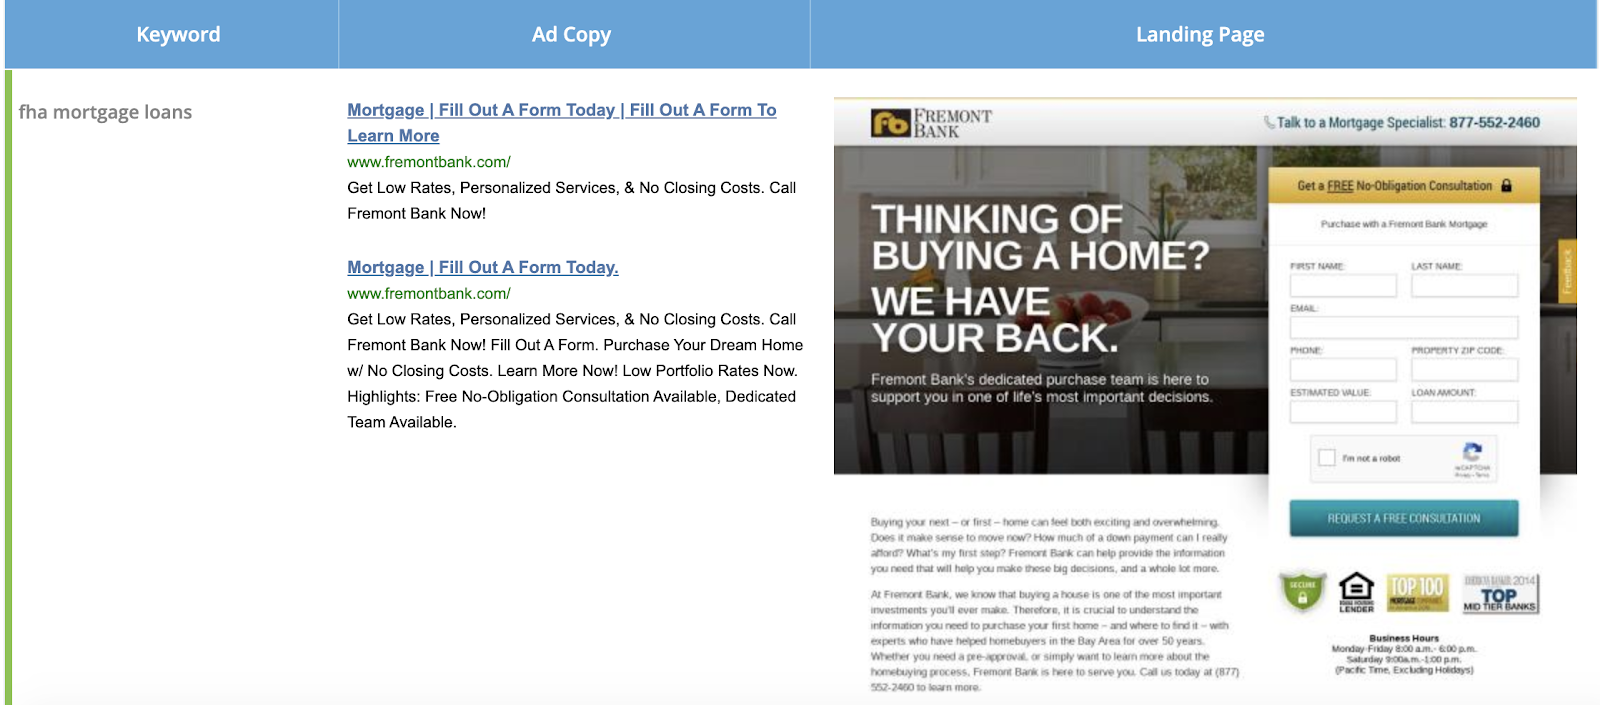 Keyword: "fha mortgage loans" with ad copy and landing page.